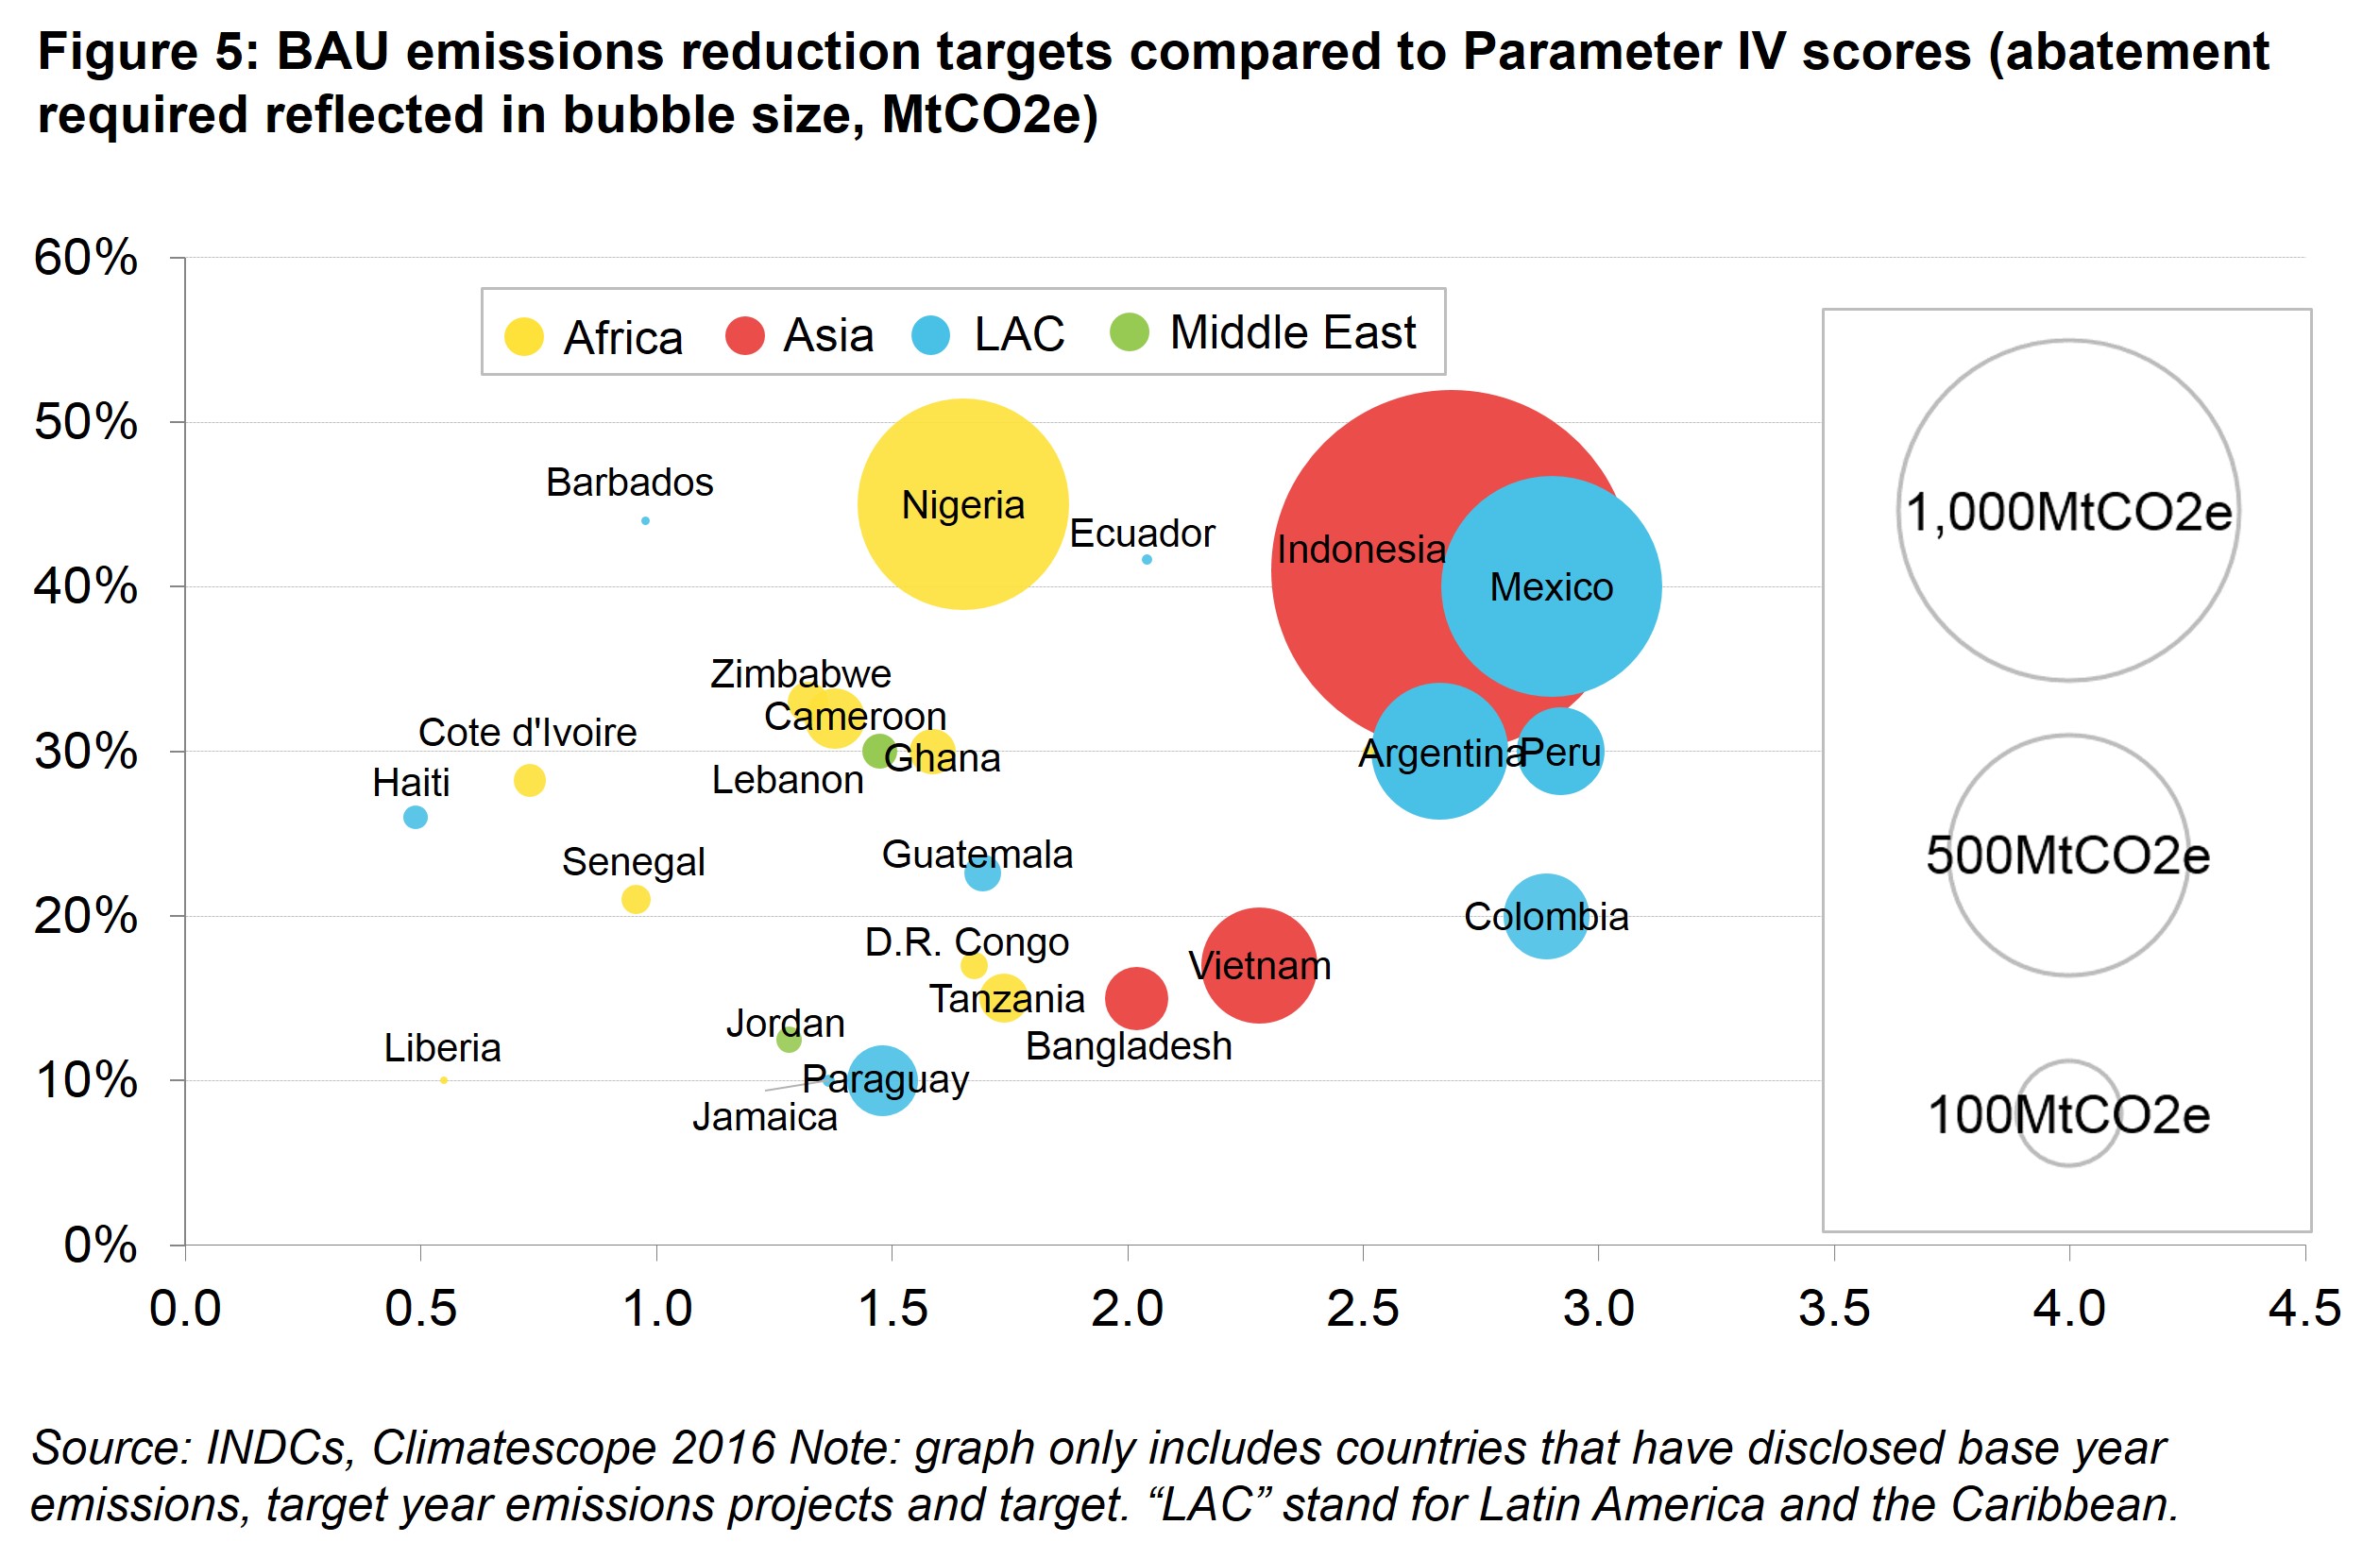 PIV Fig 5 - BAU emissions reduction targets compared to Parameter IV scores (abatement required reflected in bubble size, MtCO2e) 